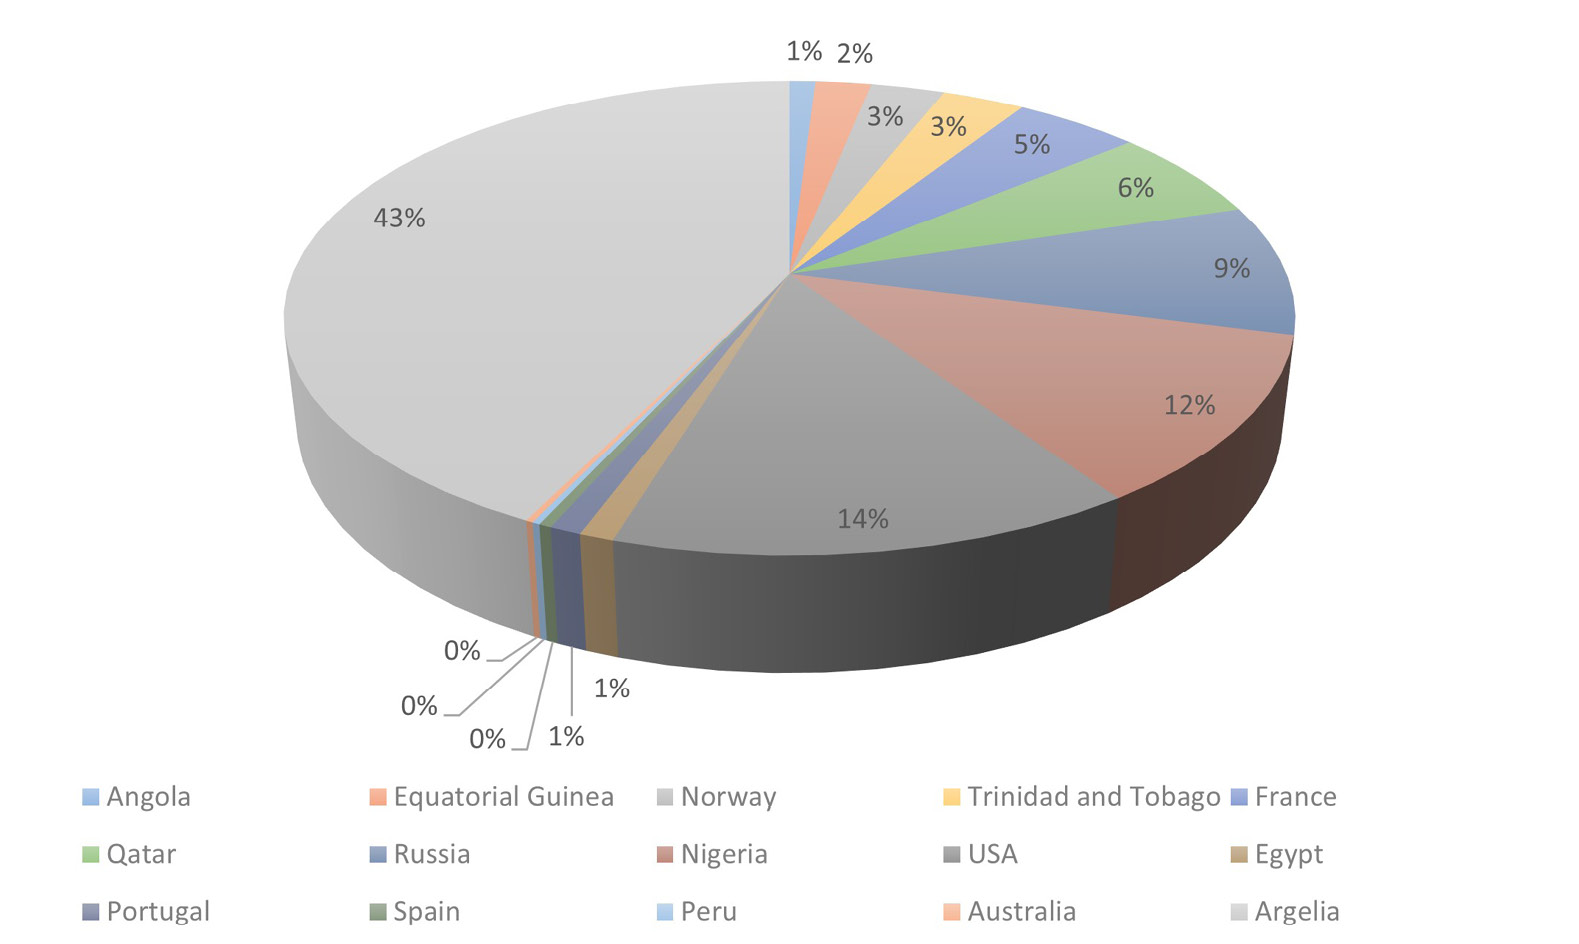 Pie chart showing the spanish natural gas sourcing by origin in 2021. The chart shows that the main supplier is Algeria, with 43,3 of total imports. The other prominent supplier are the USA, with a share of 16%.